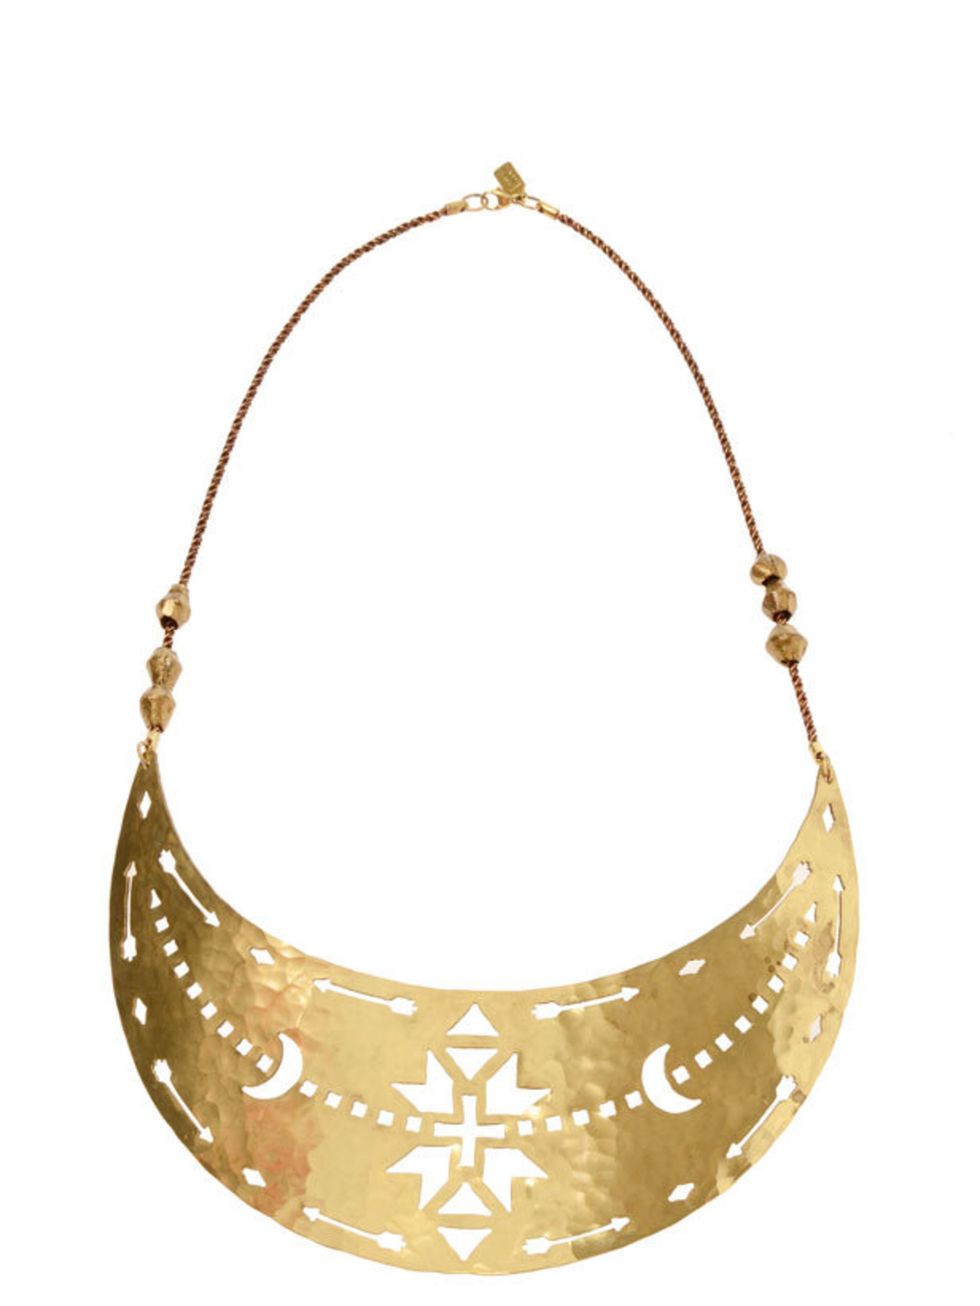 <p>Pamela Love brass breastplate, £395, at <a href="http://www.brownsfashion.com/Product/Women/Women/Accessories/Fashion_Jewellery/Brass_Navajo_breastplate/Product.aspx?p=3216292&amp;pc=1949746&amp;cl=4">Browns Fashion</a></p>